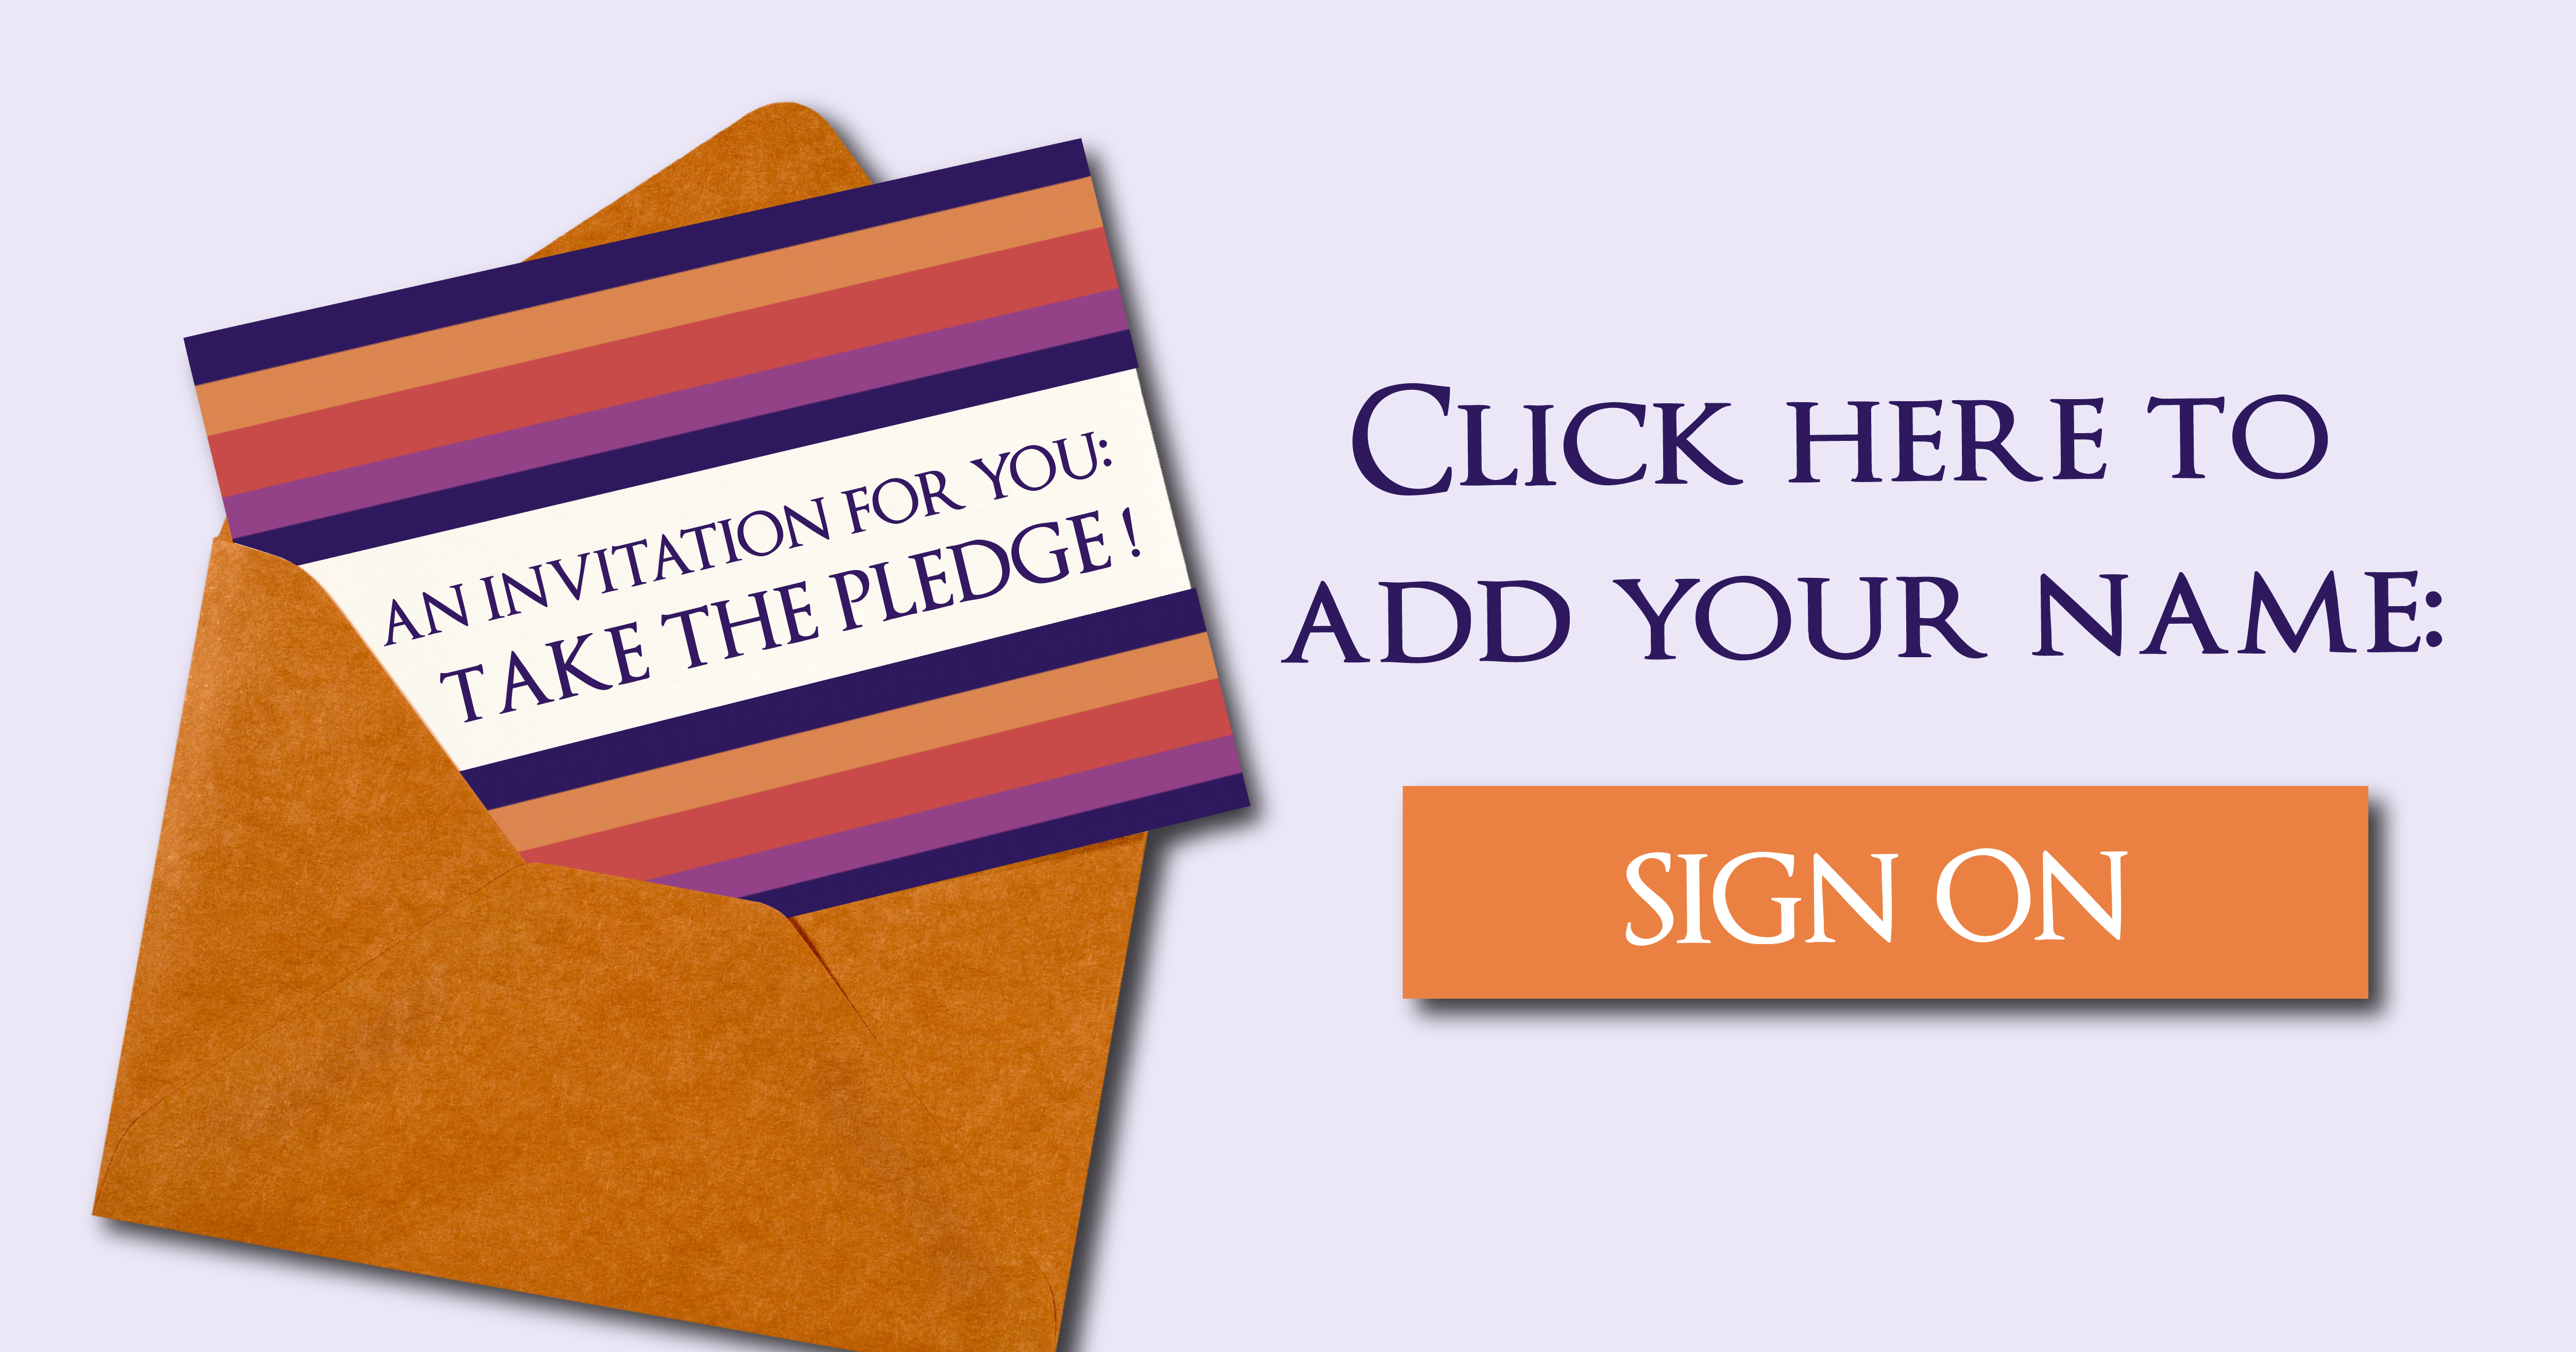 An invitation for you: take the pledge! Click here to sign your name: [SIGN ON]